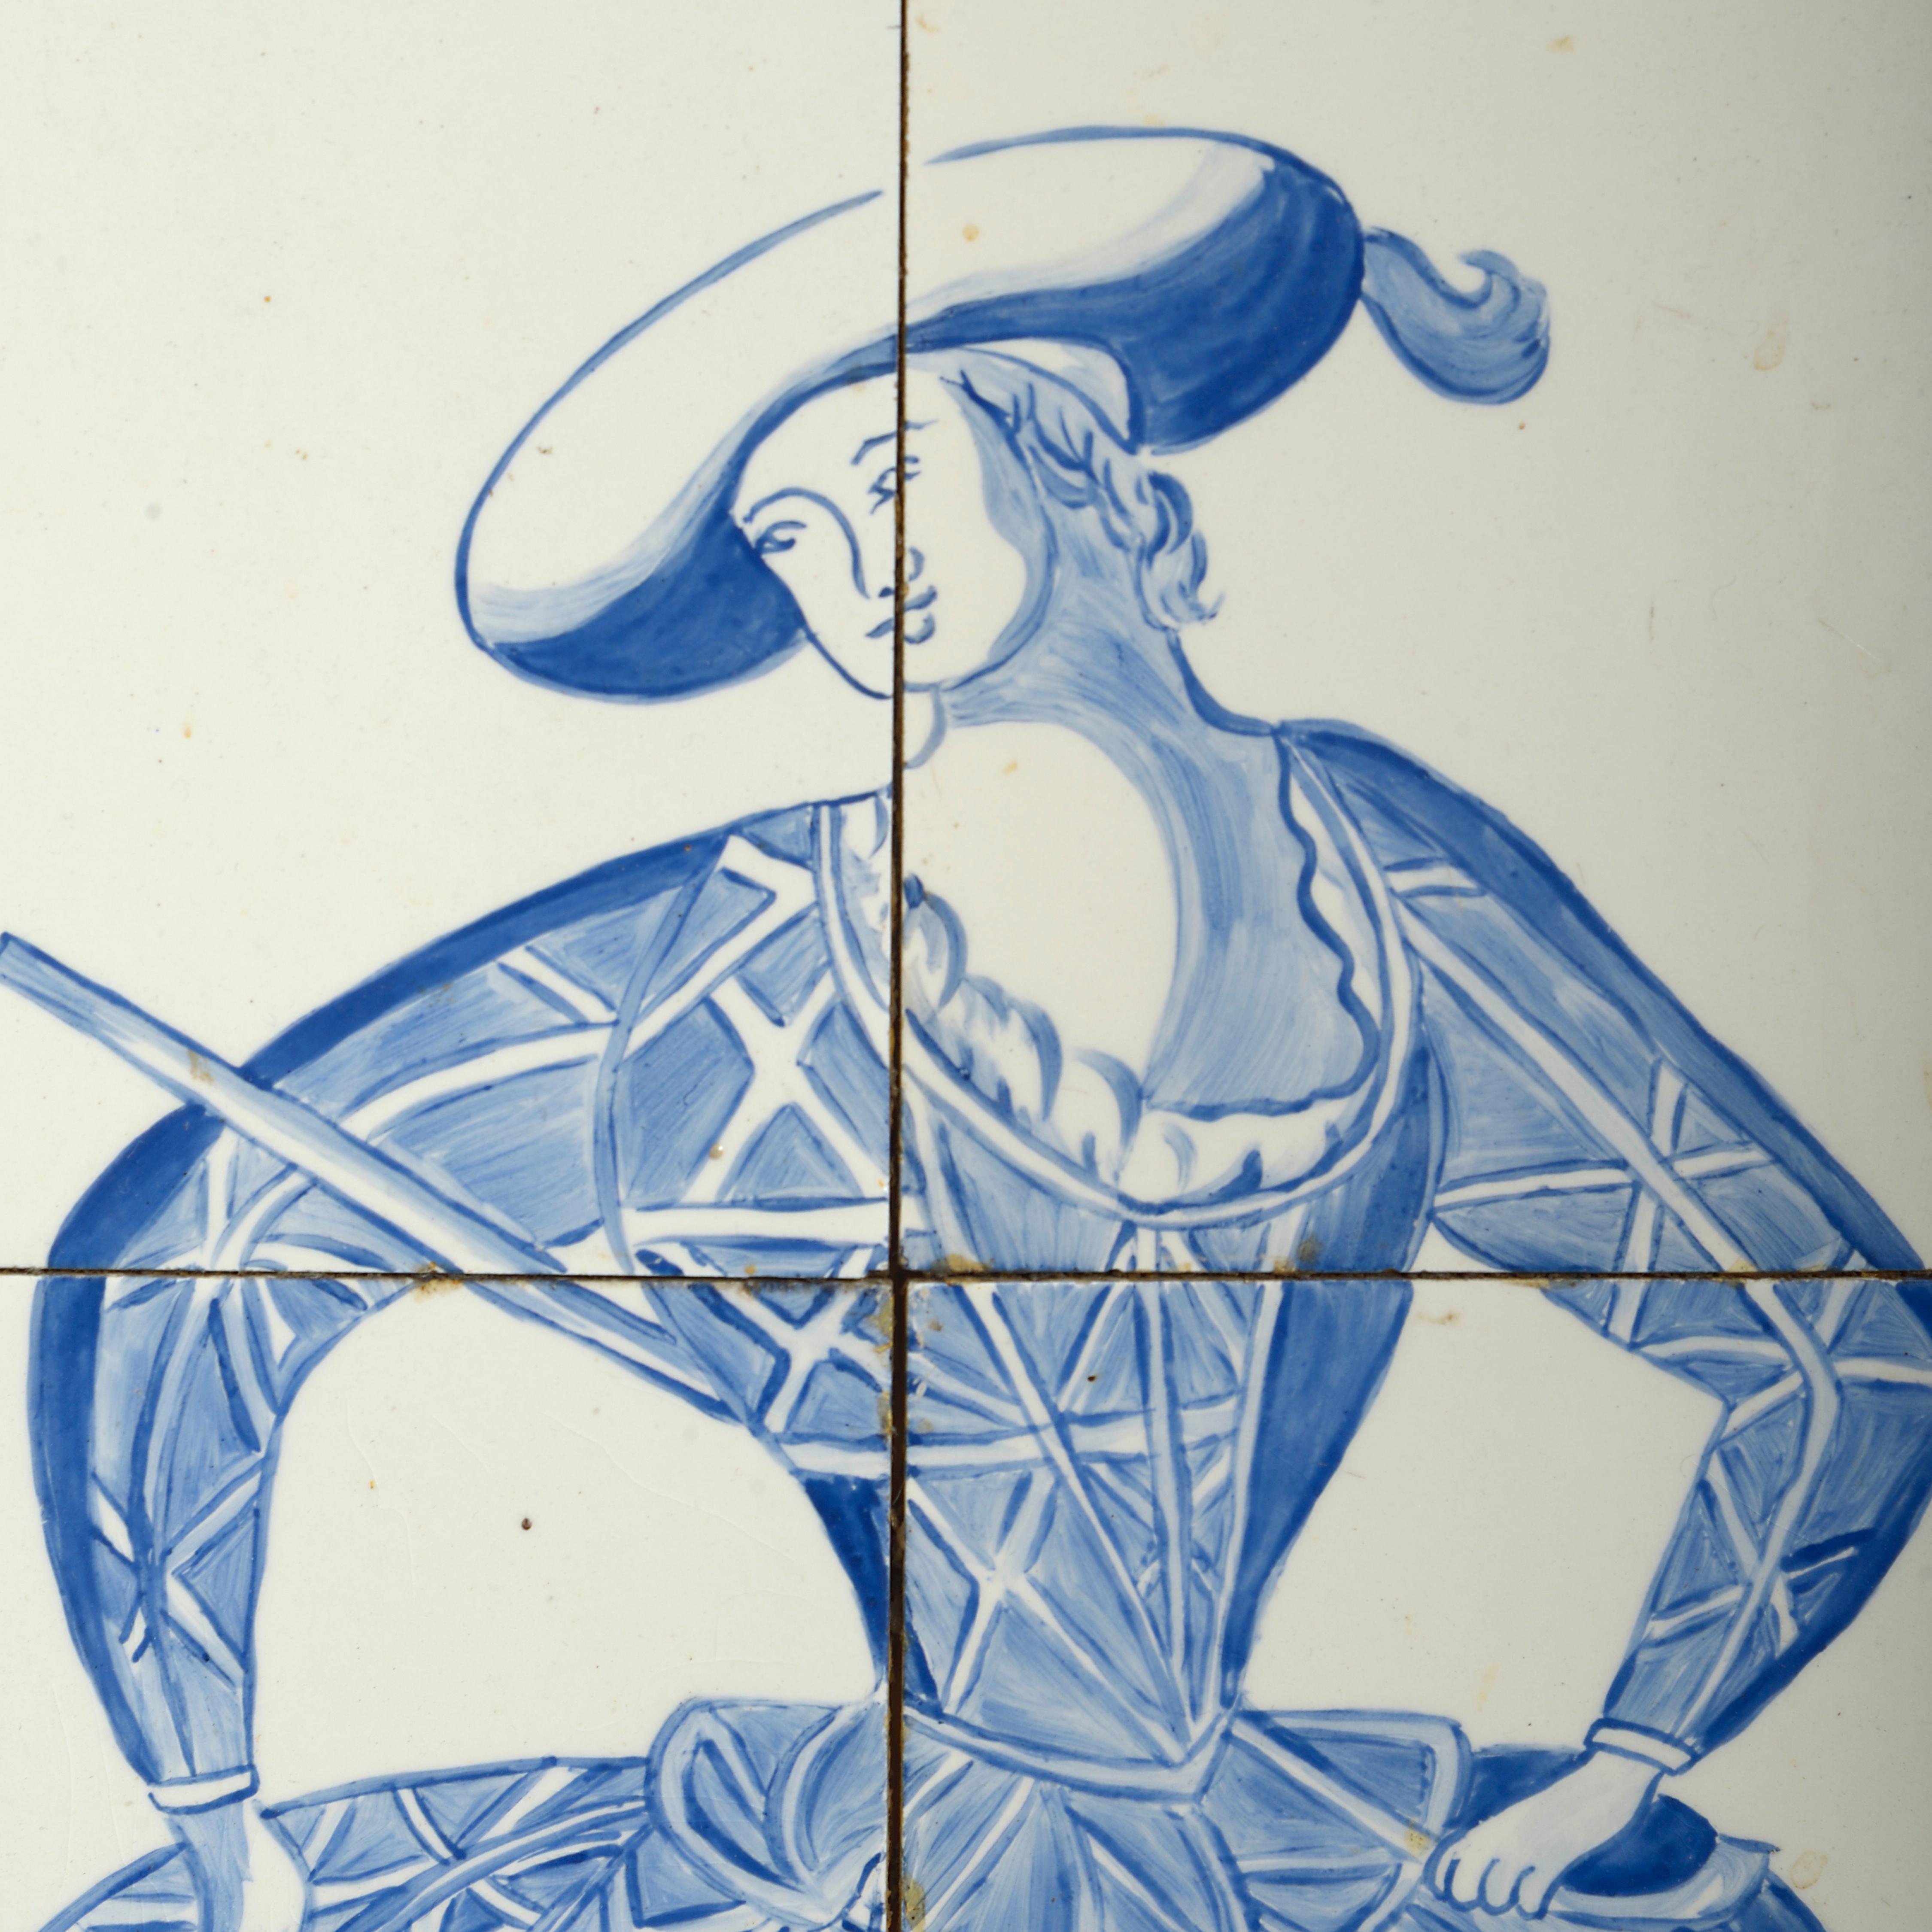 A charming pair of early 20th century blue and white glazed Delft pottery tile pictures, depicting a male harlequin figure and a fashionable female character, set within wooden frames. Each picture consisting of six tiles.